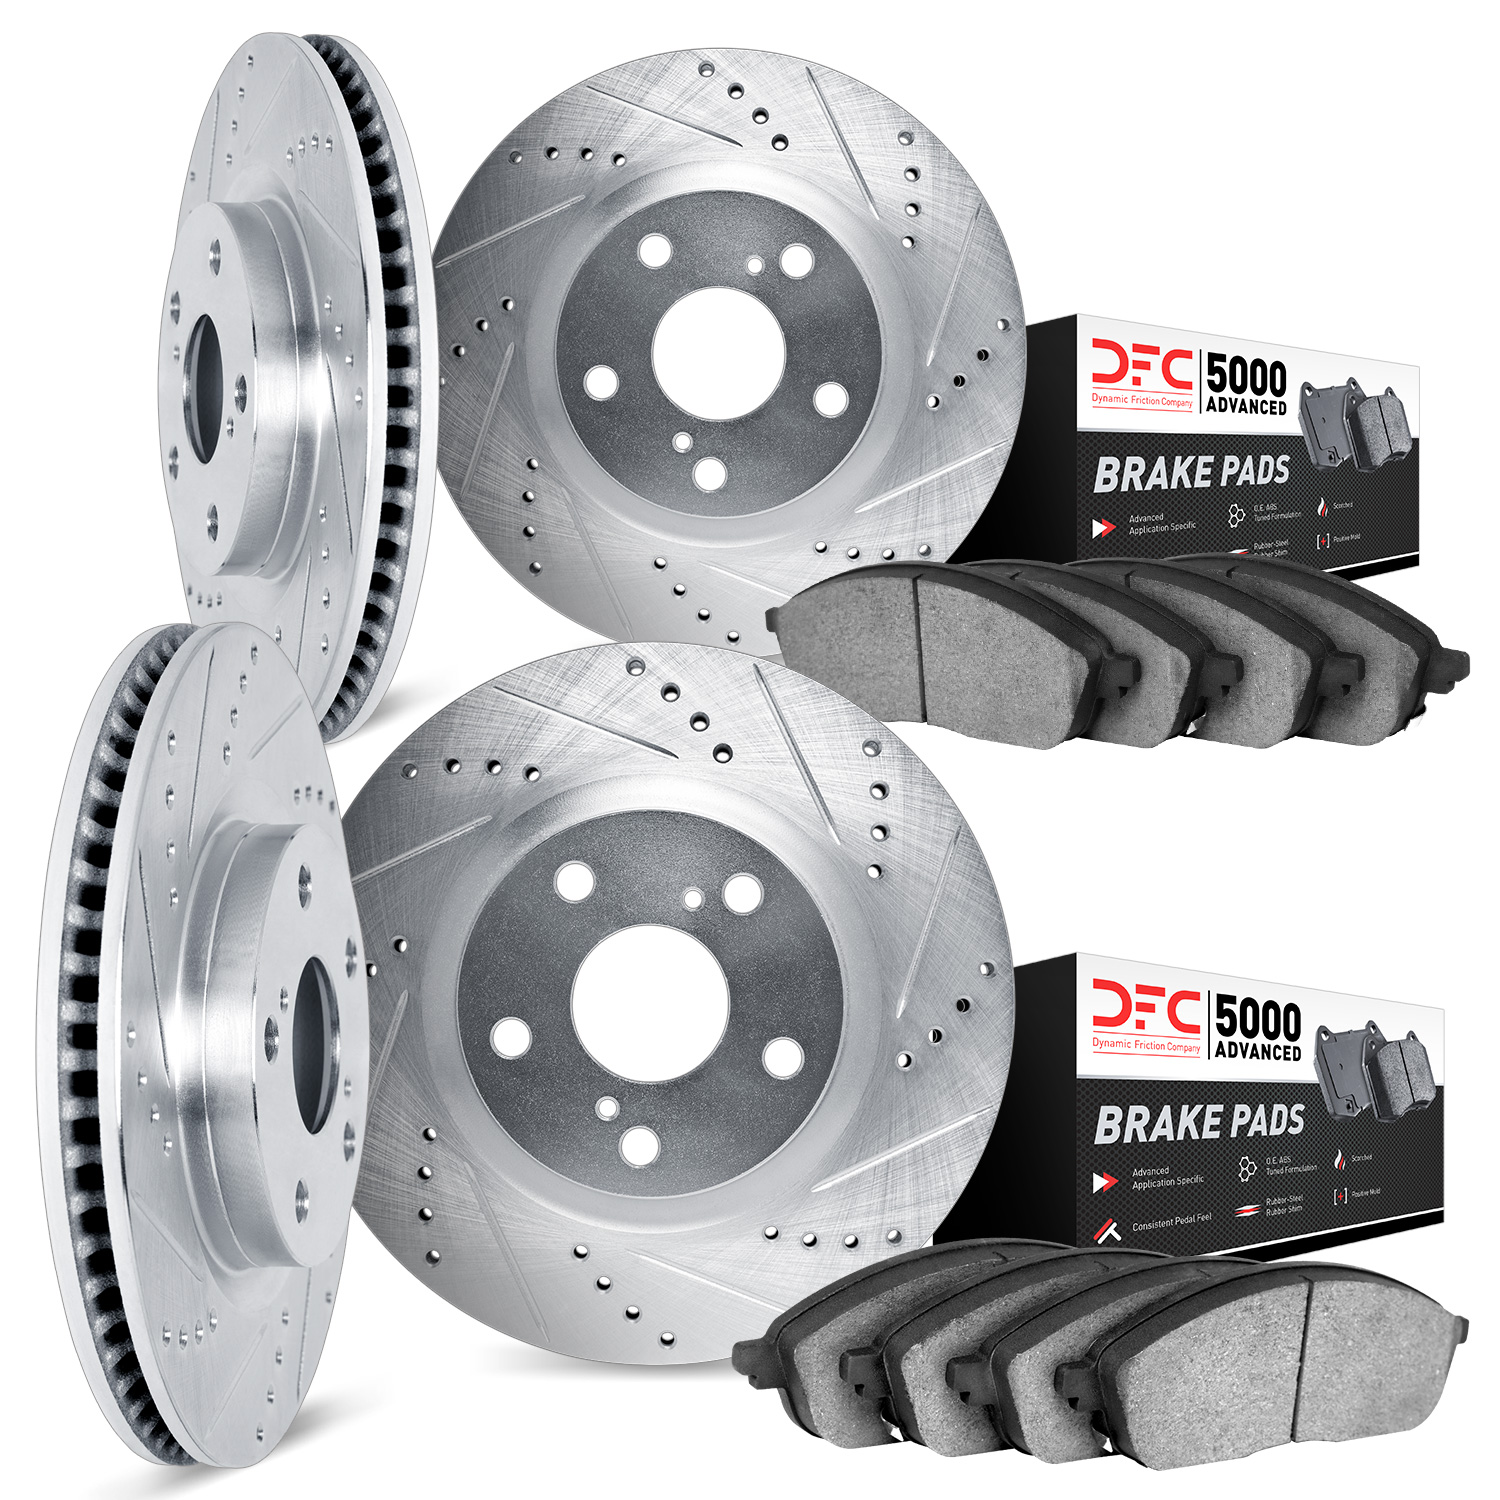 7504-31047 Drilled/Slotted Brake Rotors w/5000 Advanced Brake Pads Kit [Silver], 2012-2016 BMW, Position: Front and Rear